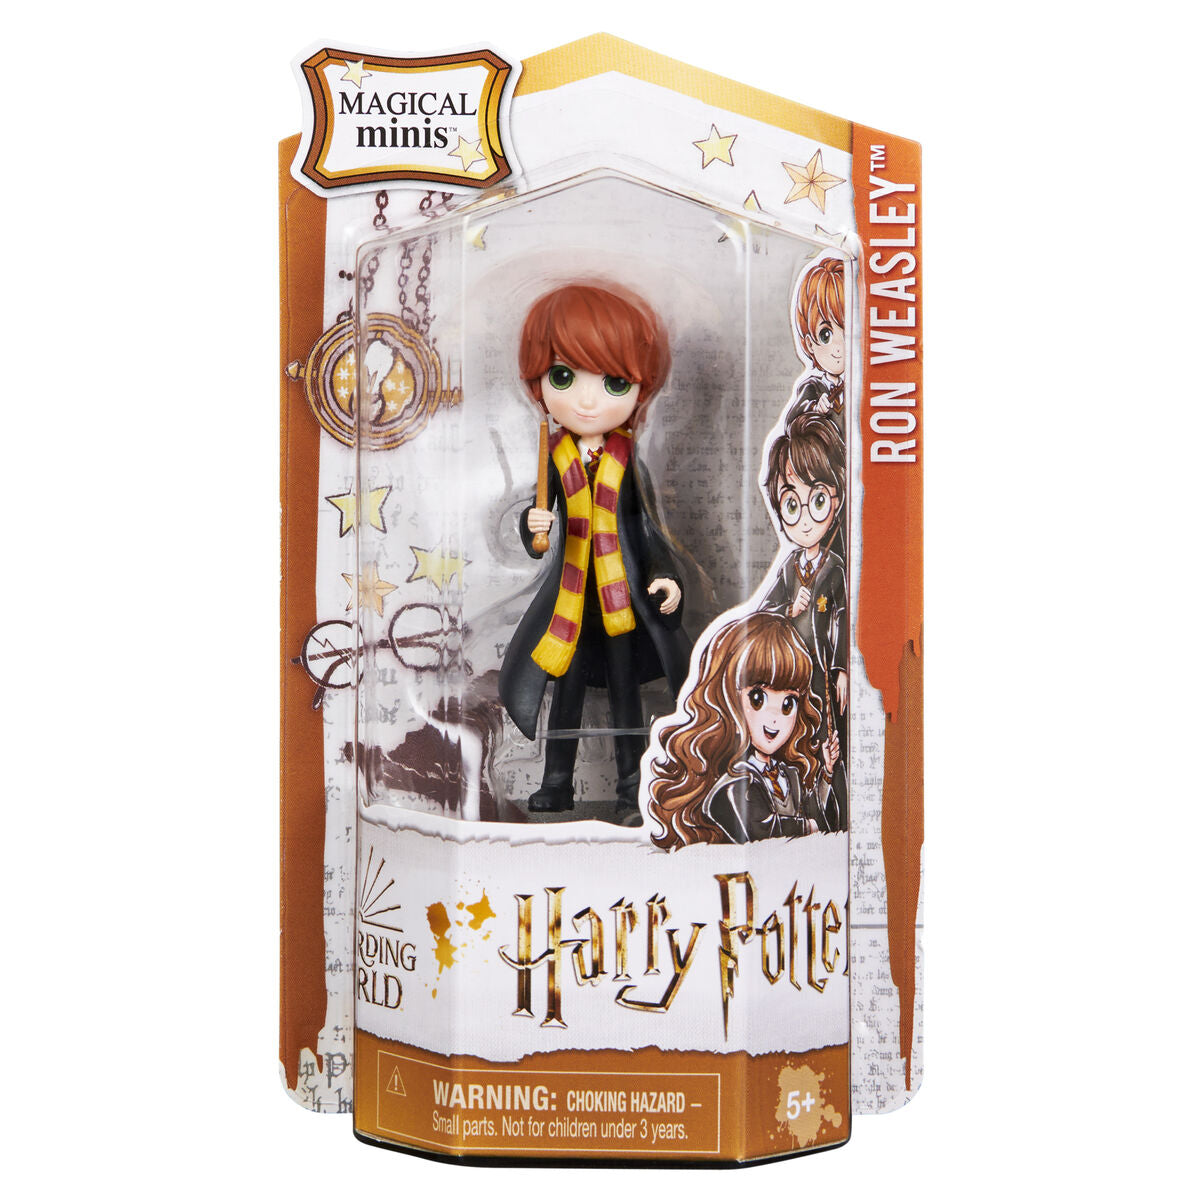 Wizarding World Magical Minis Ron Weasley